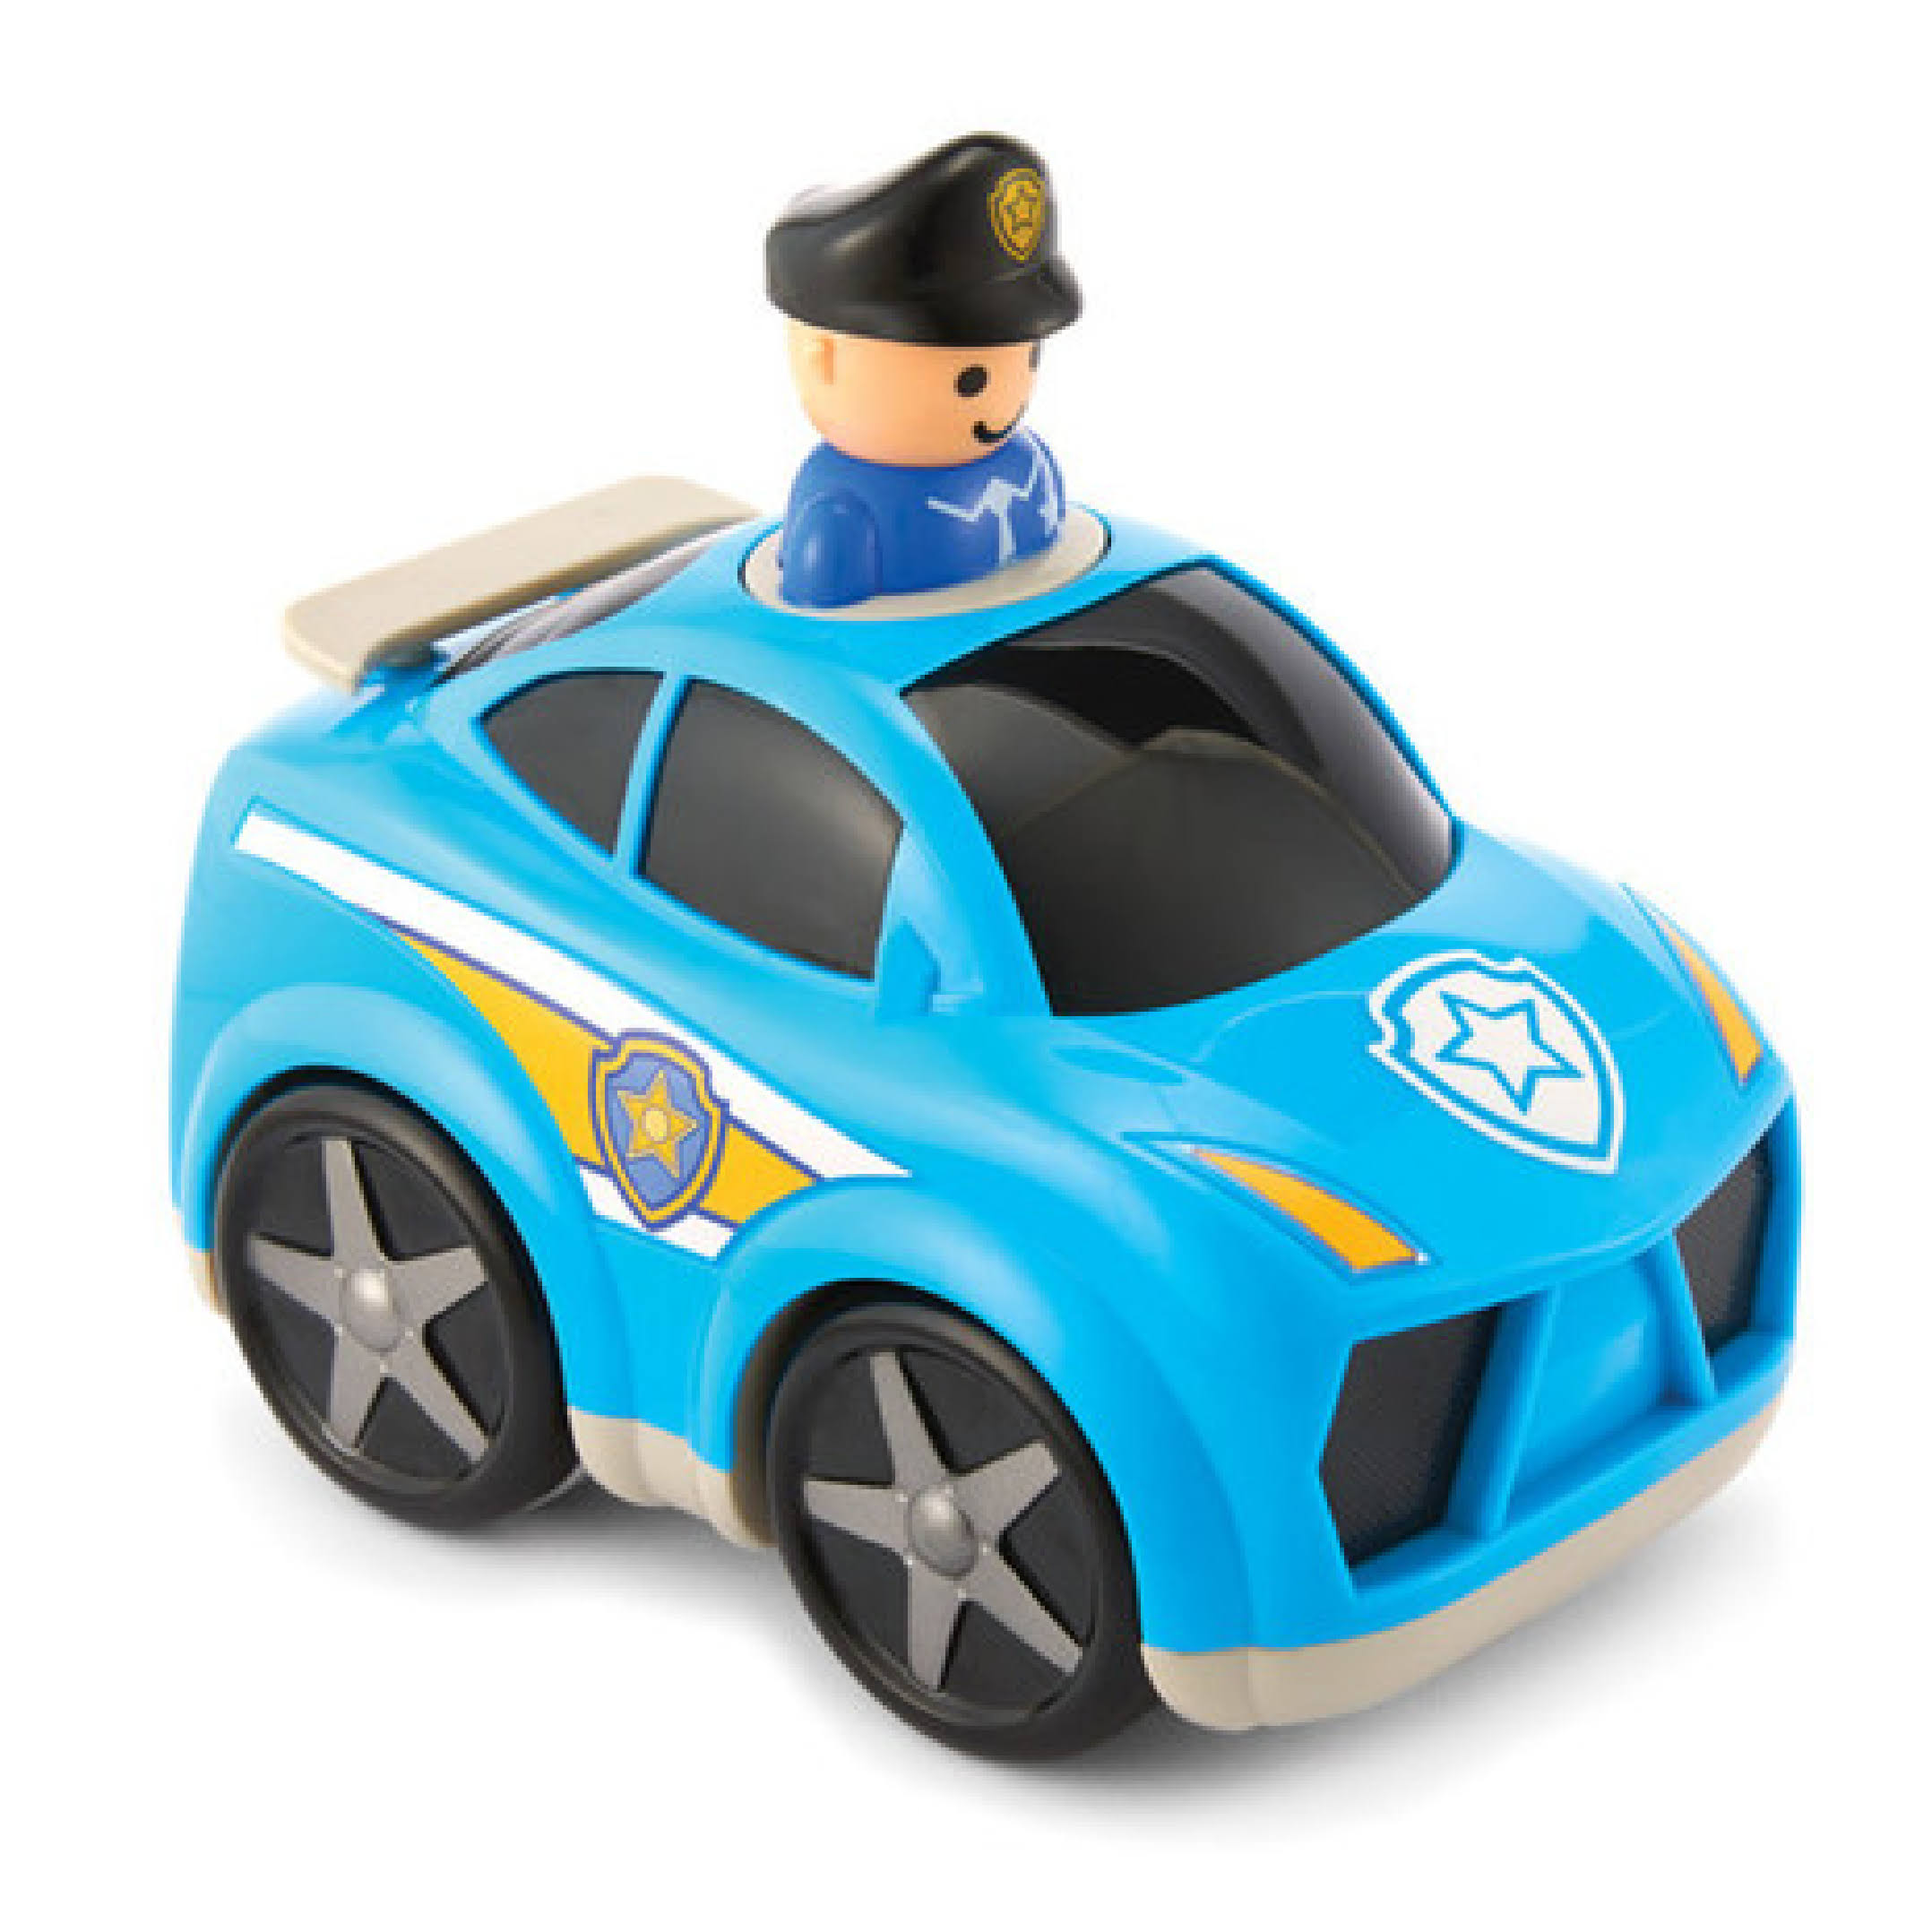 Kidoozie Press N Zoom Police Car - Developmental Activity Toy For Todd